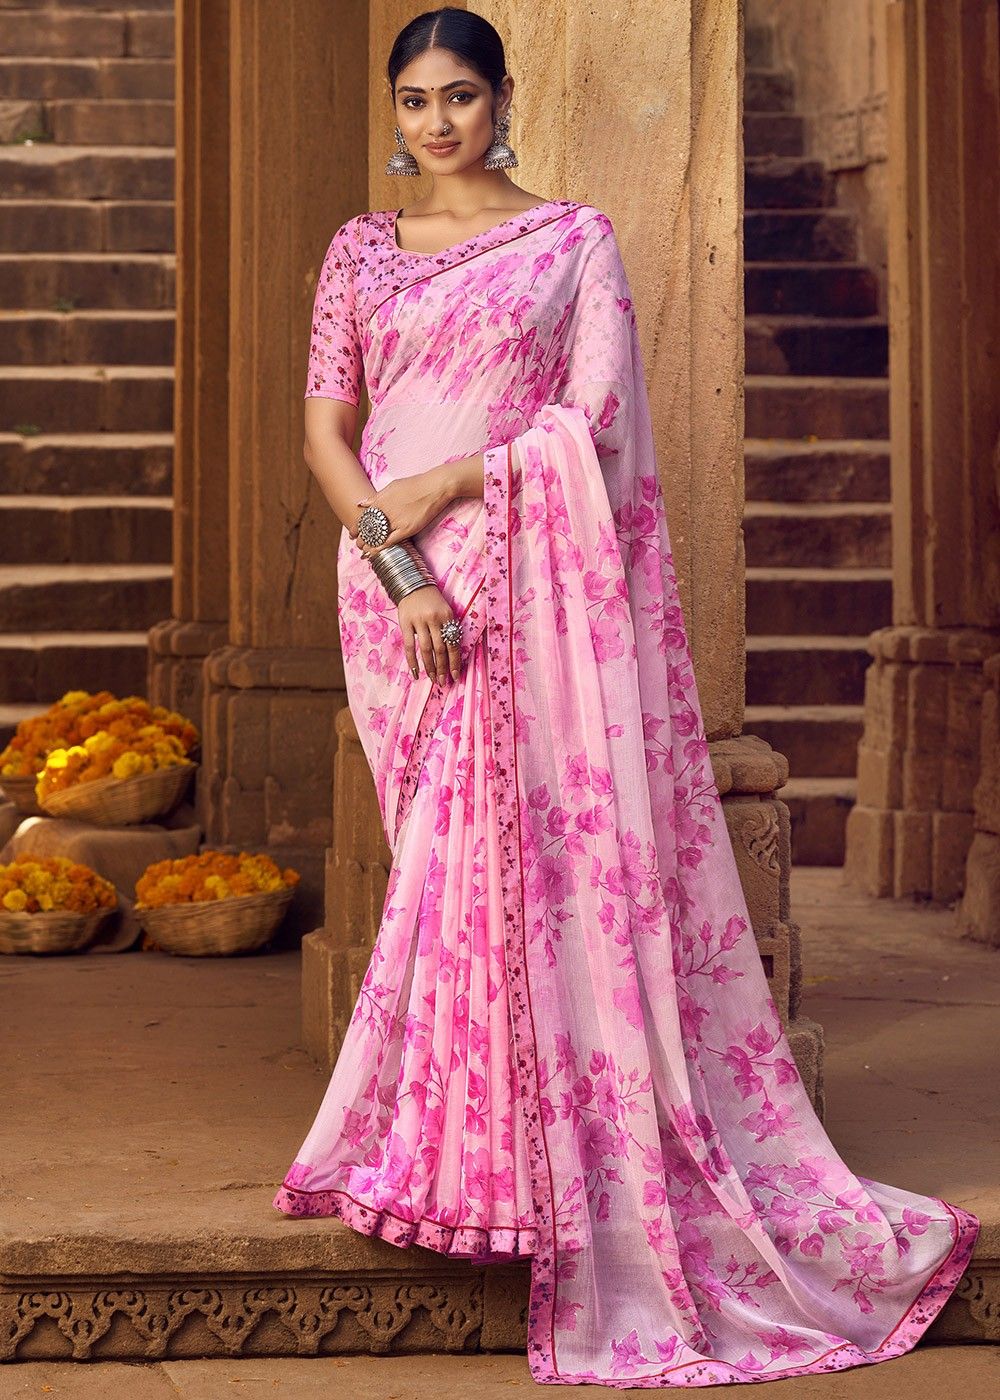 Update more than 79 floral chiffon saree